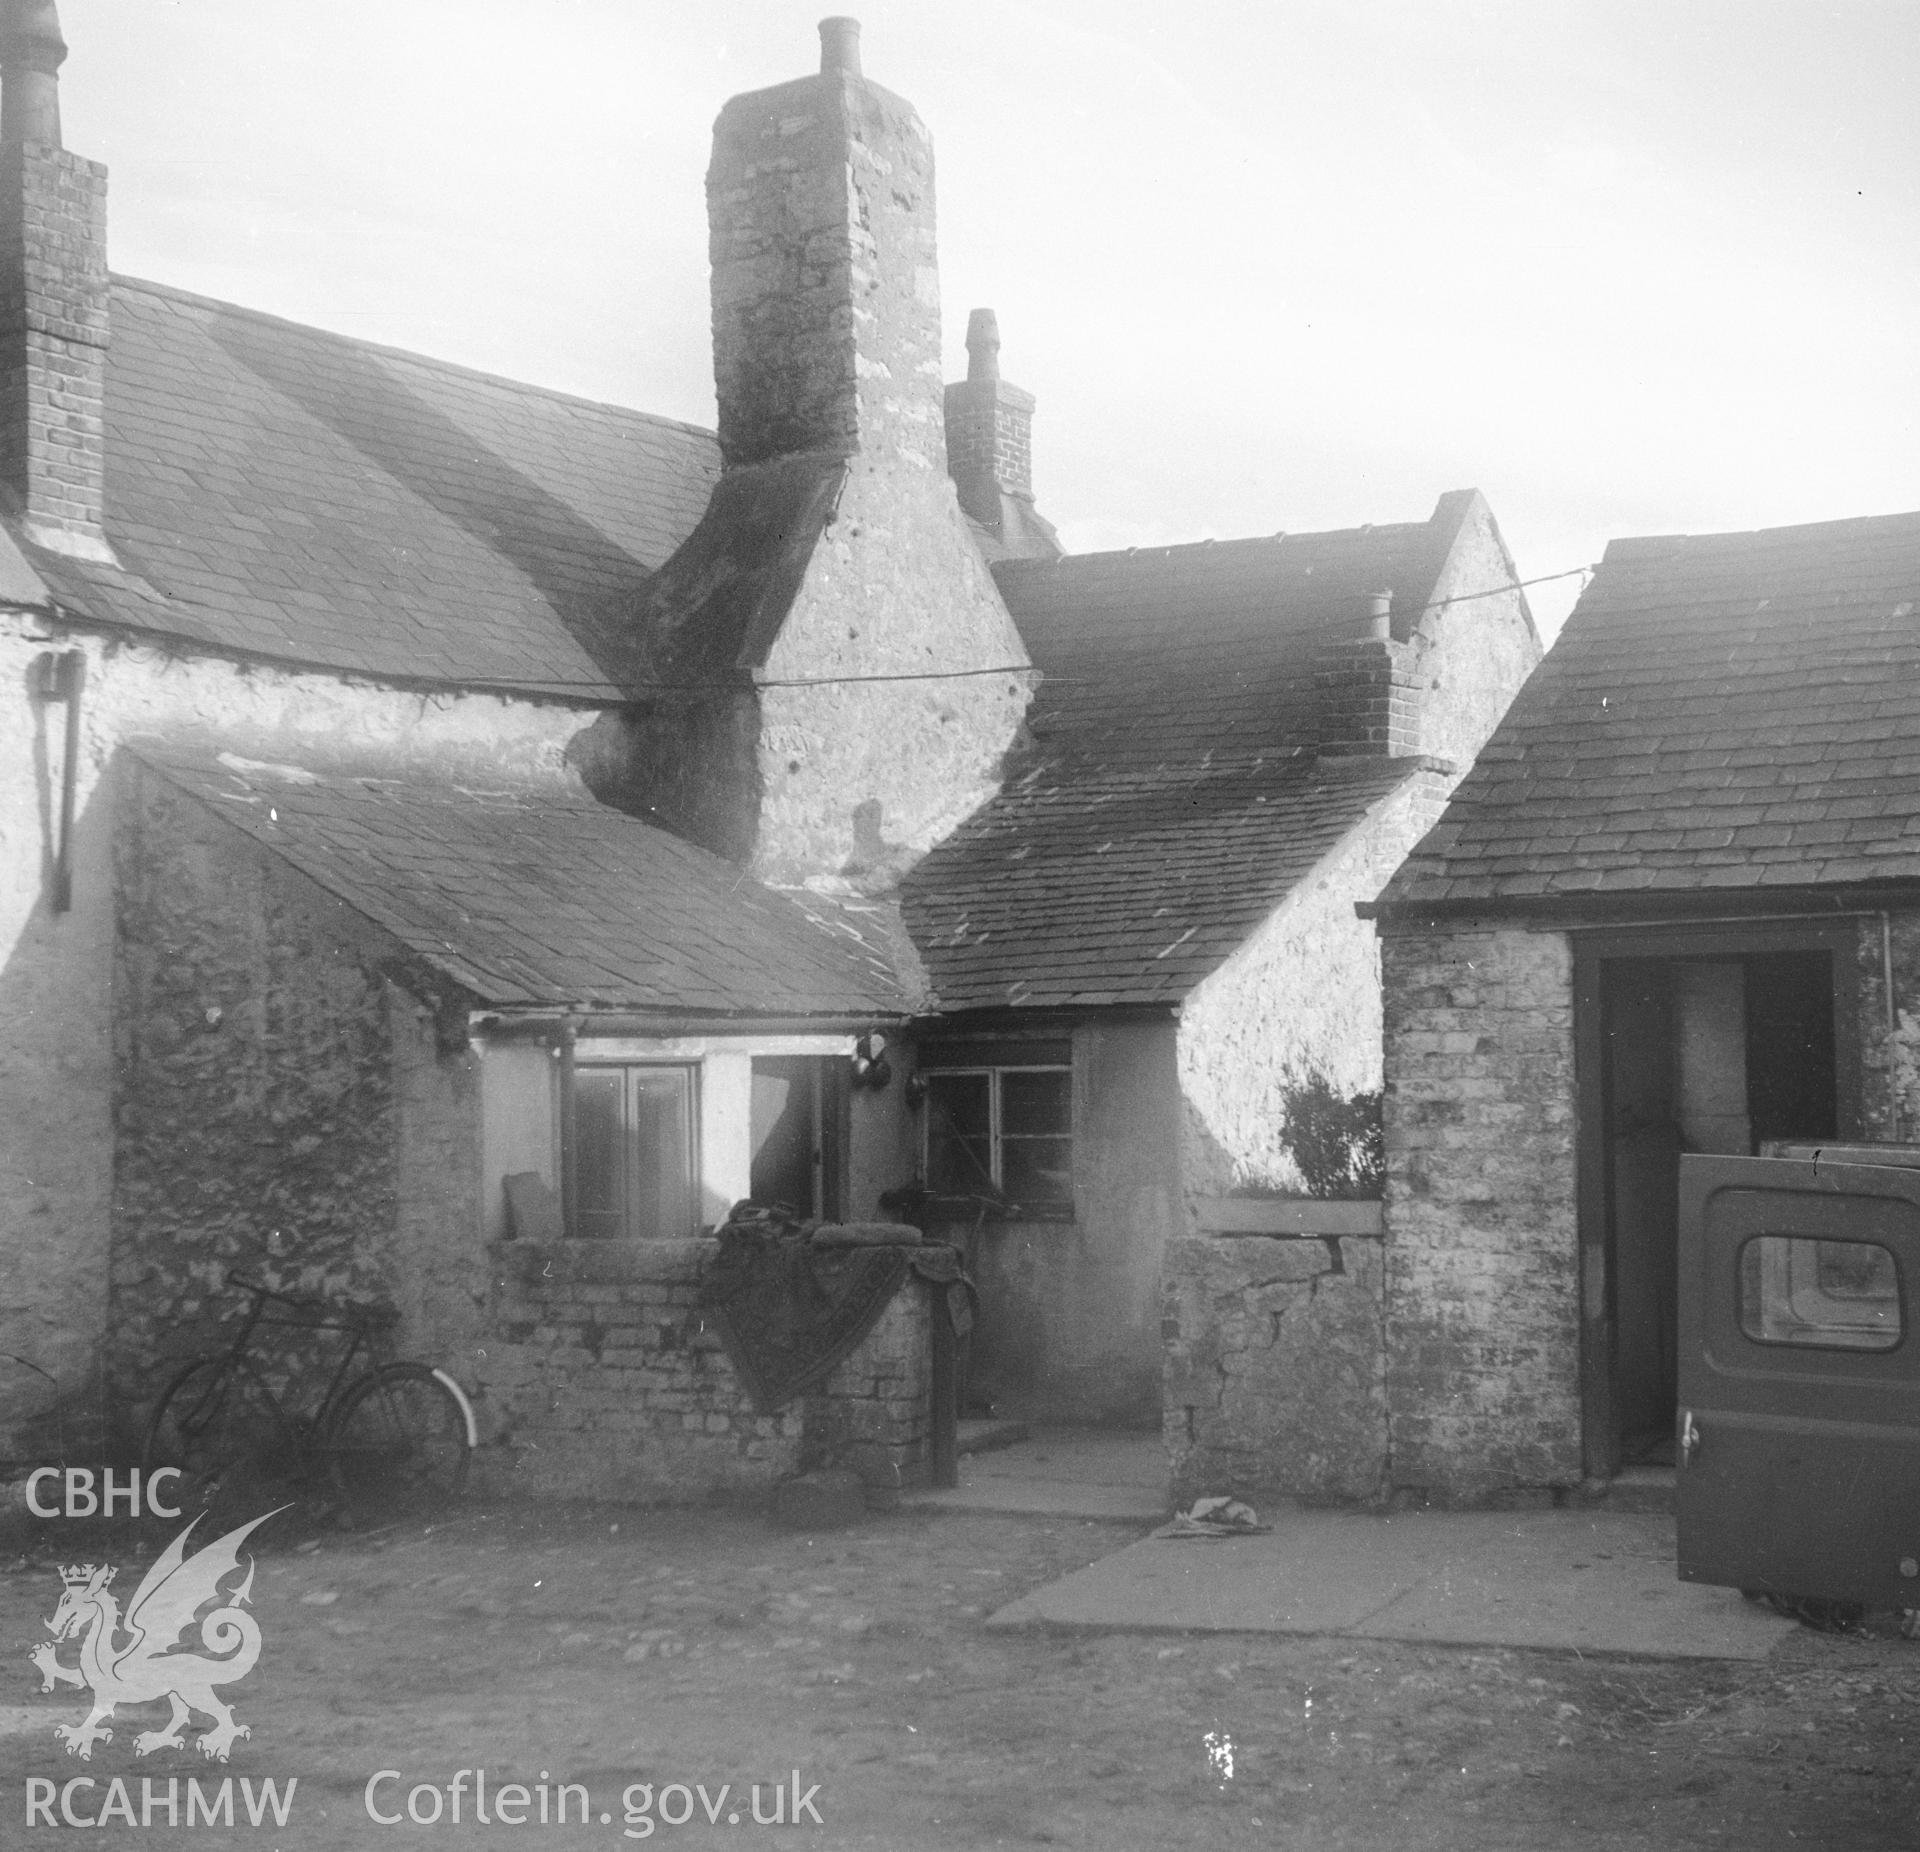 Digital copy of a black and white nitrate negative showing exterior view of Waen, Flintshire.